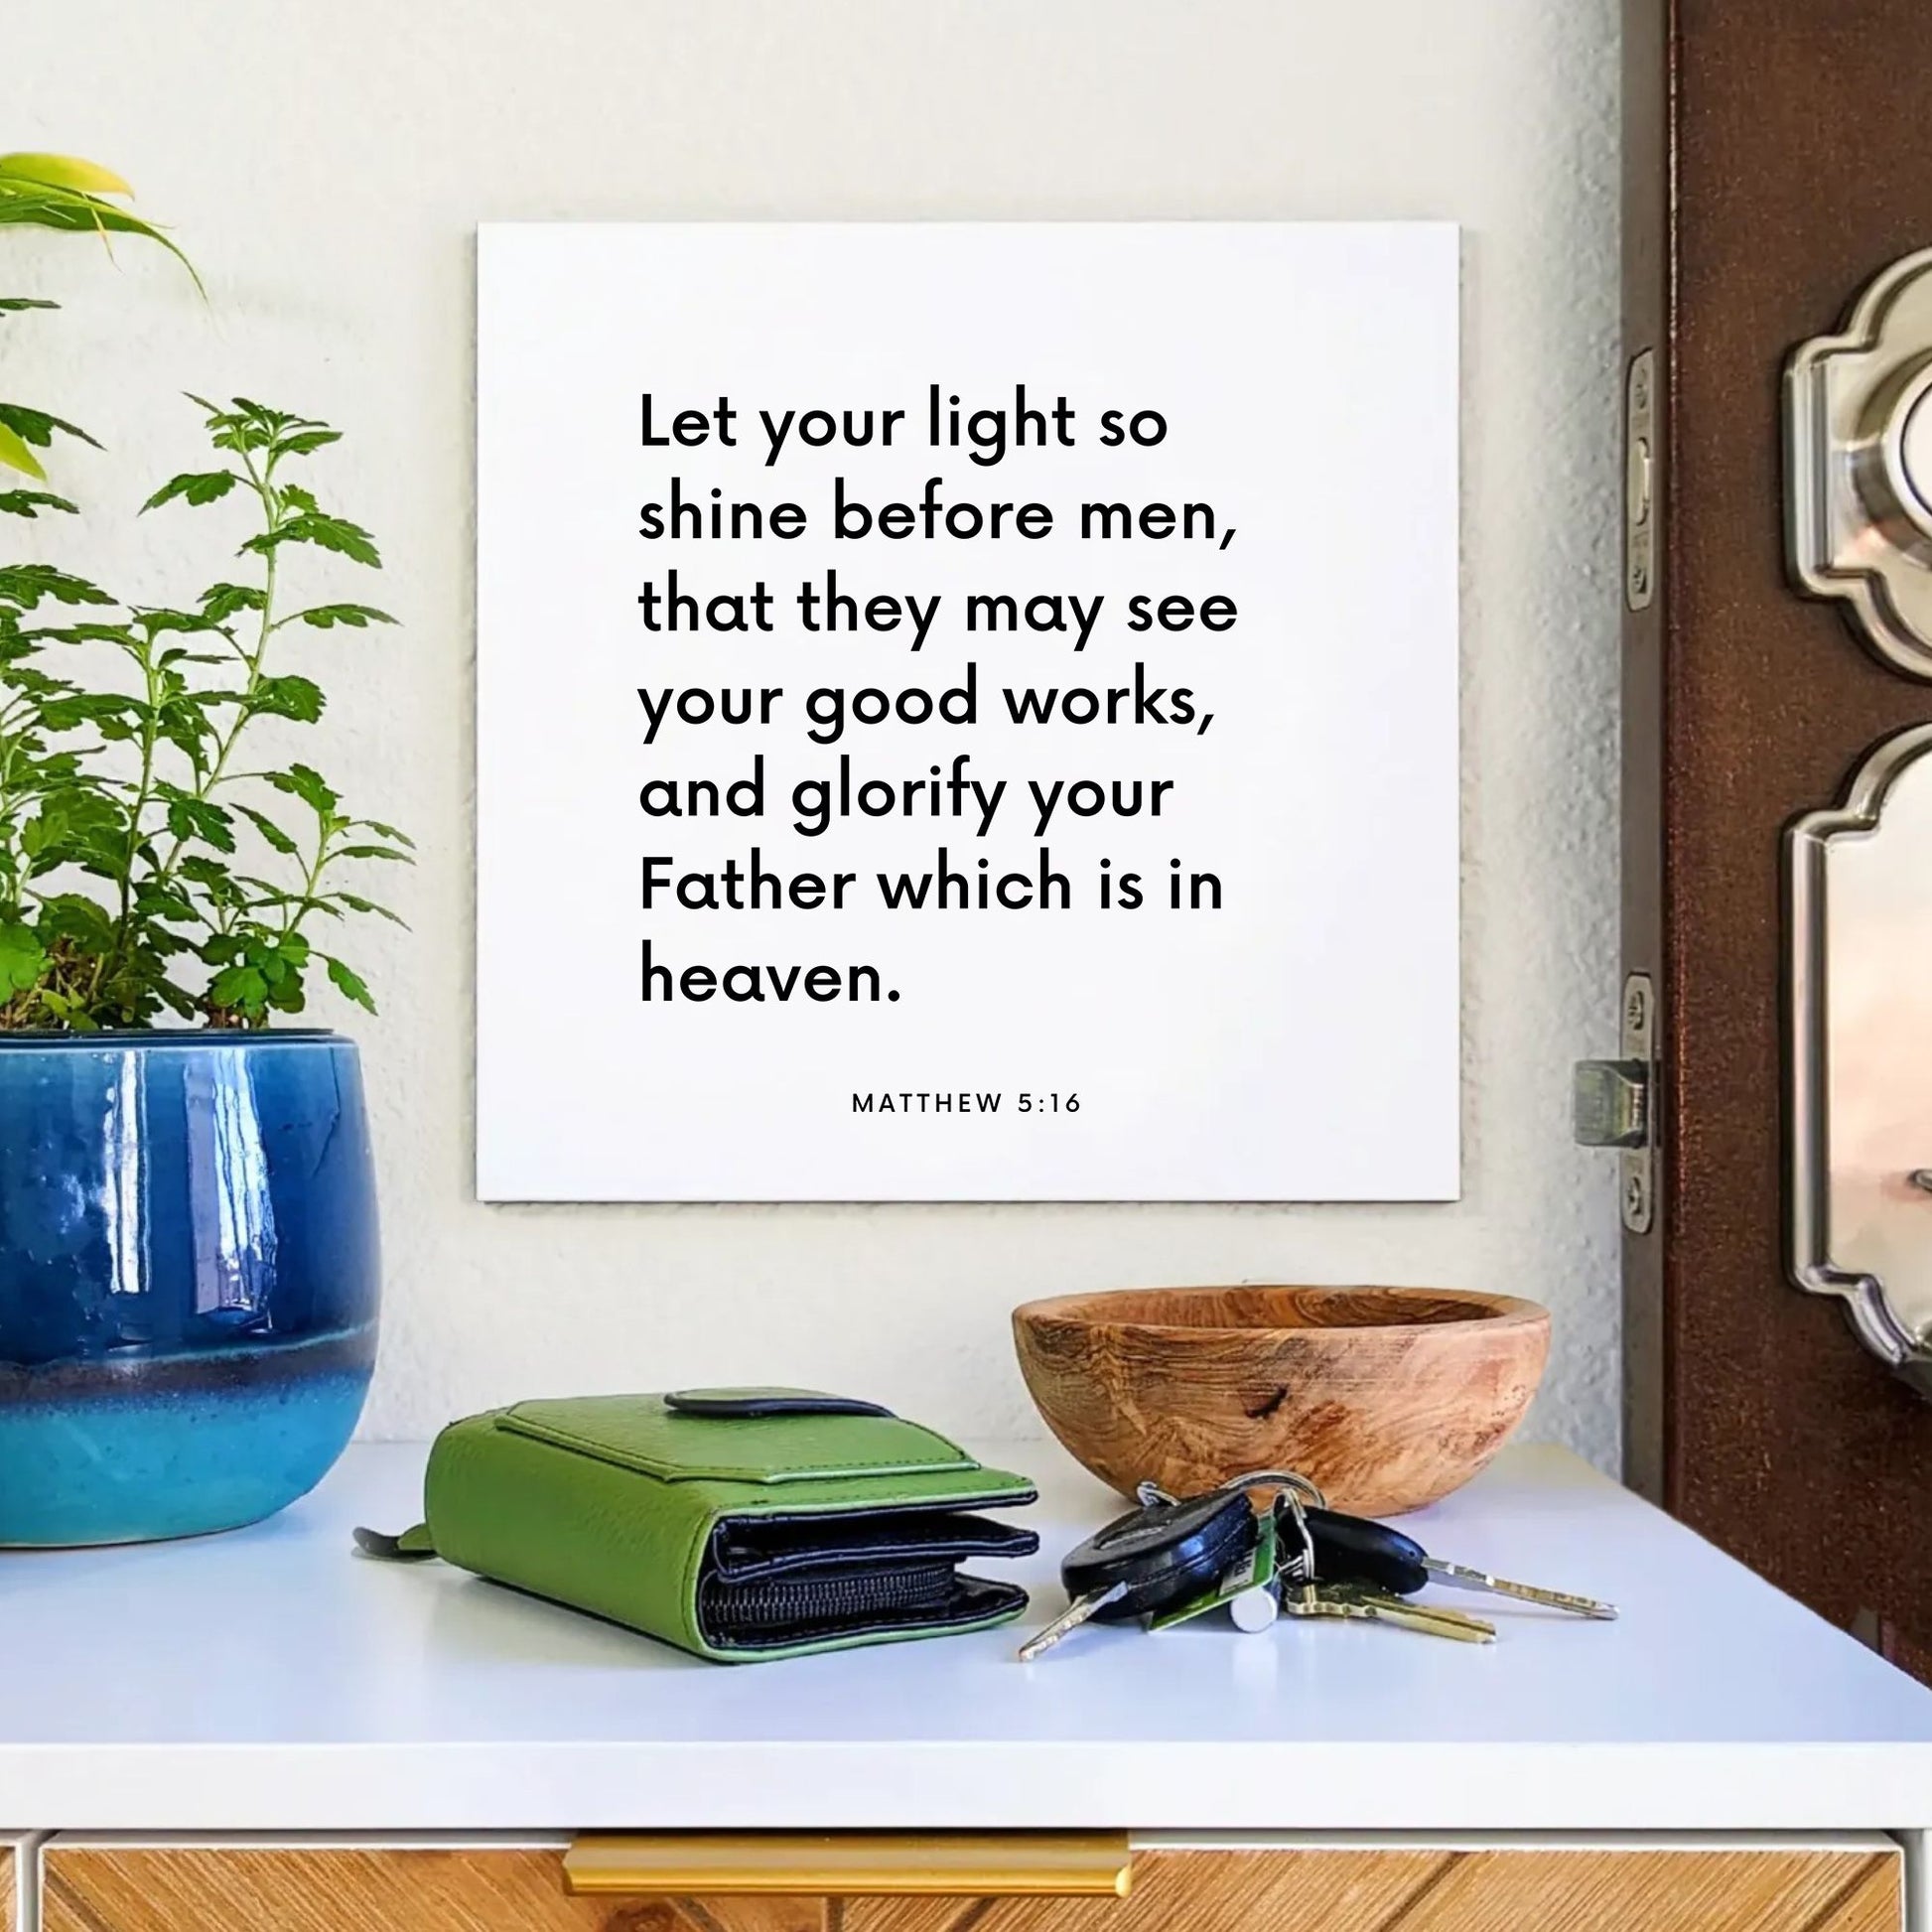 Entryway mouting of the scripture tile for Matthew 5:16 - "Let your light so shine before men"